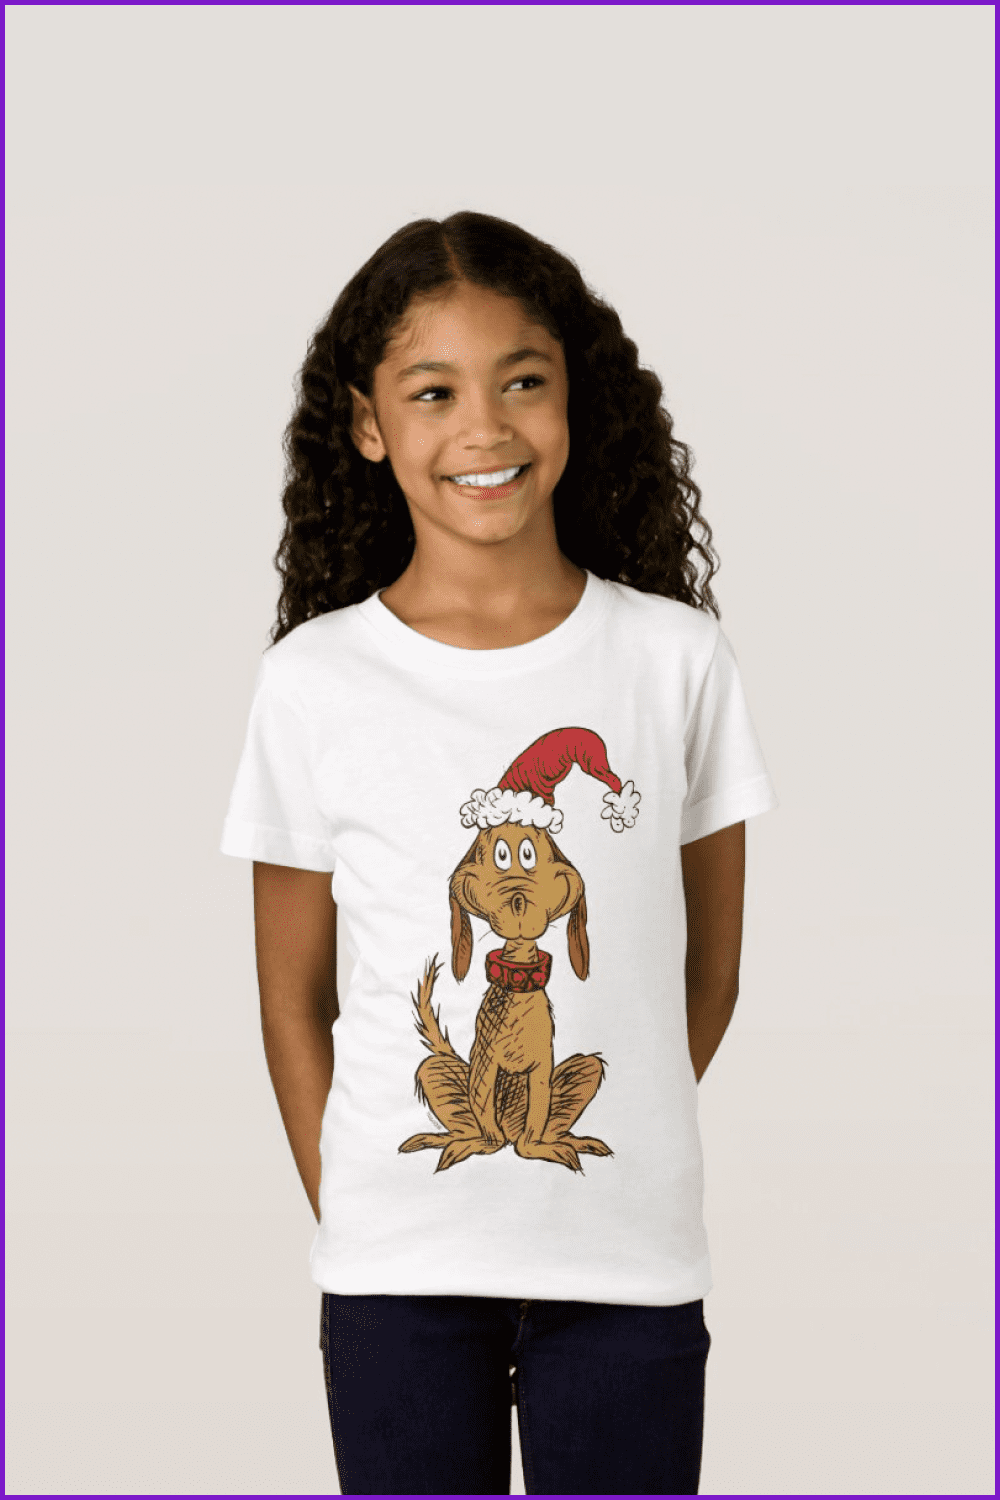 Girl in the t-shirt with a dog in a Santa hat and a red collar.